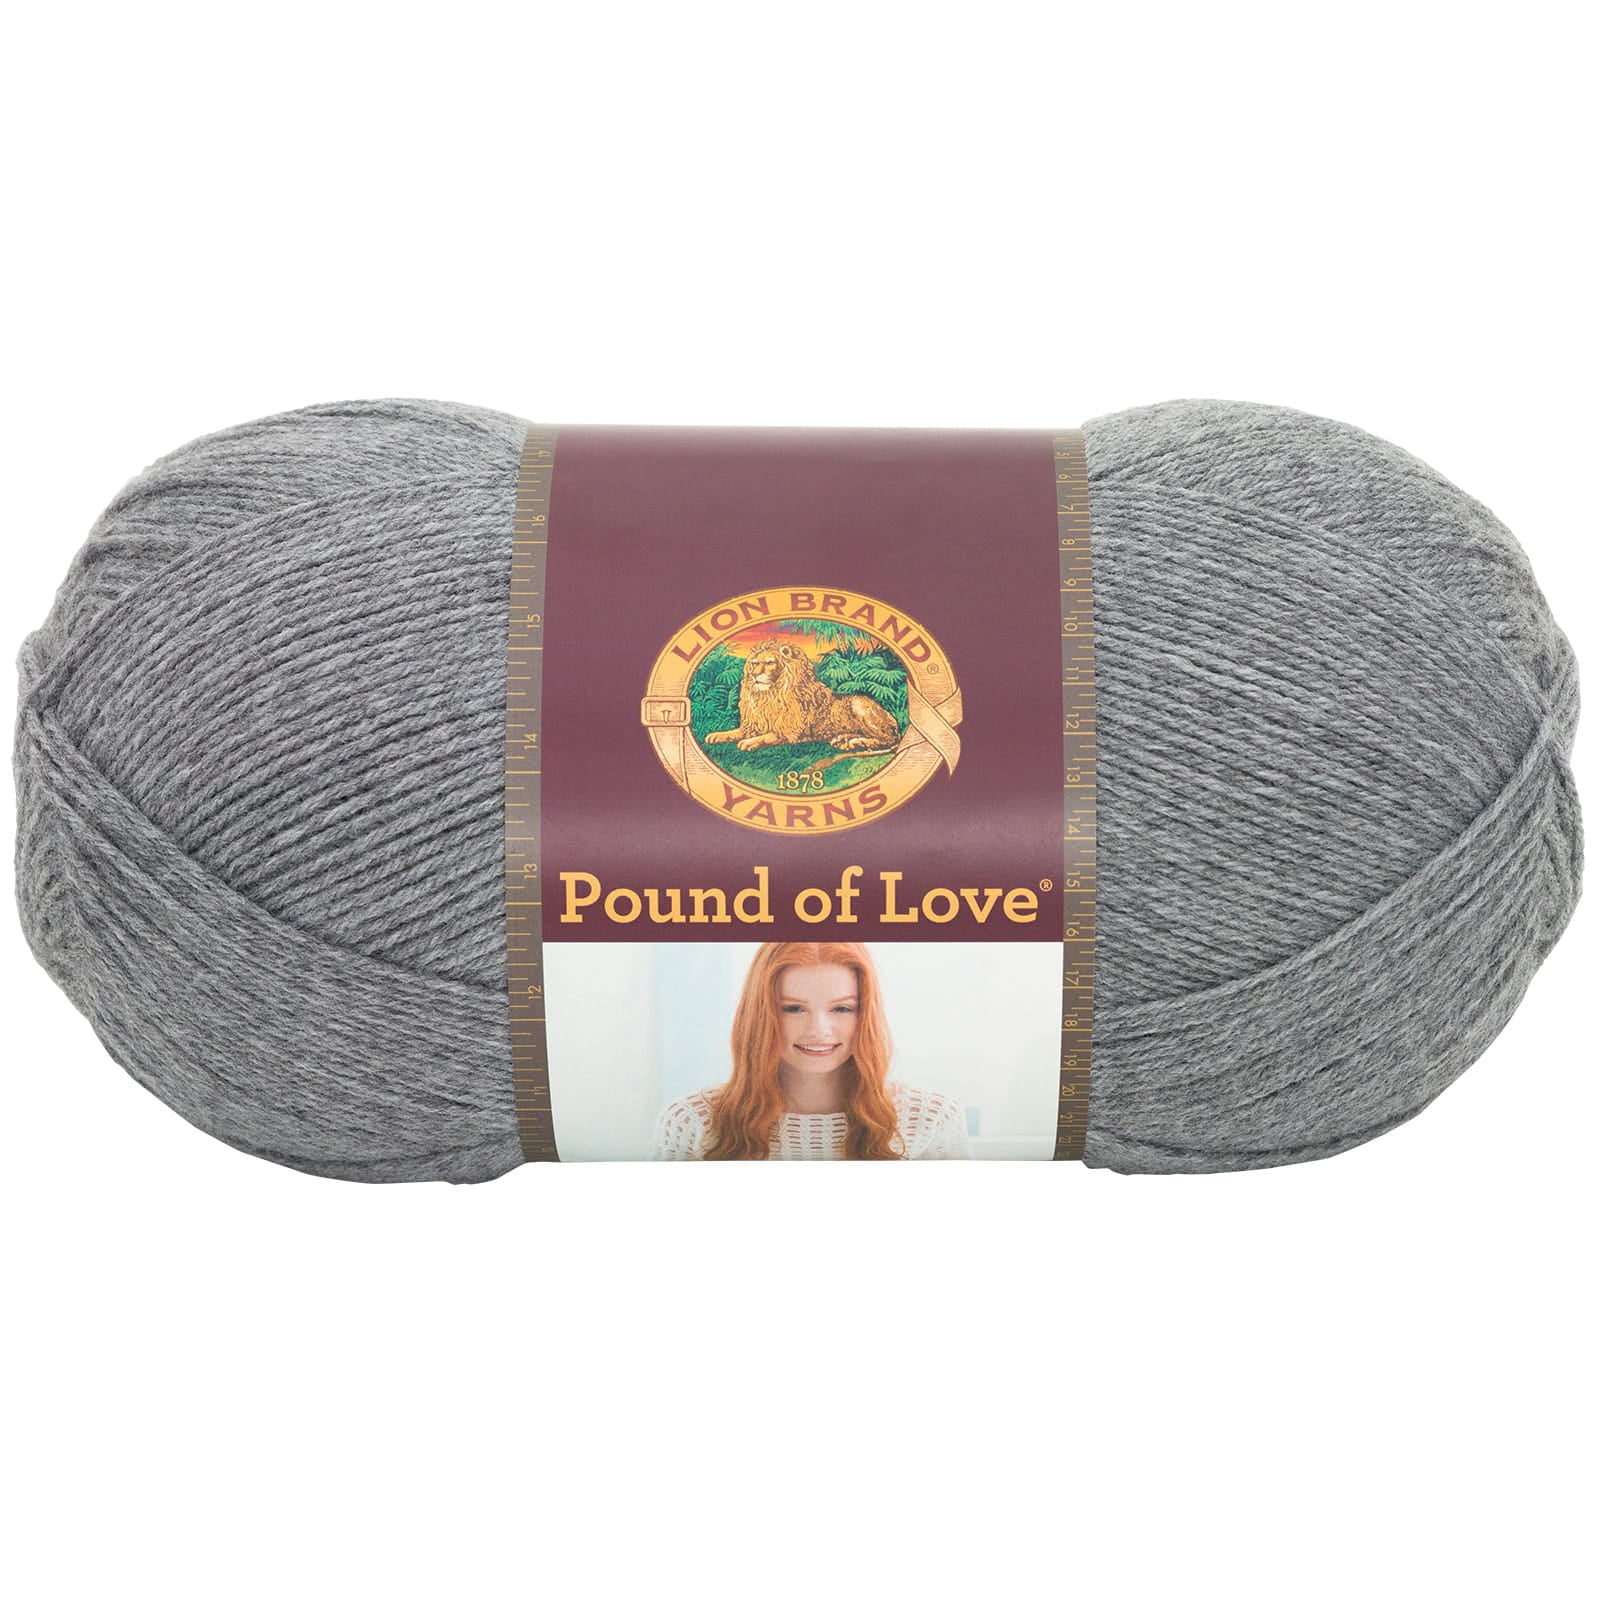 Pound of Love Yarn Review! @Lion Brand Yarn 🧶 (this is not an ad, jus